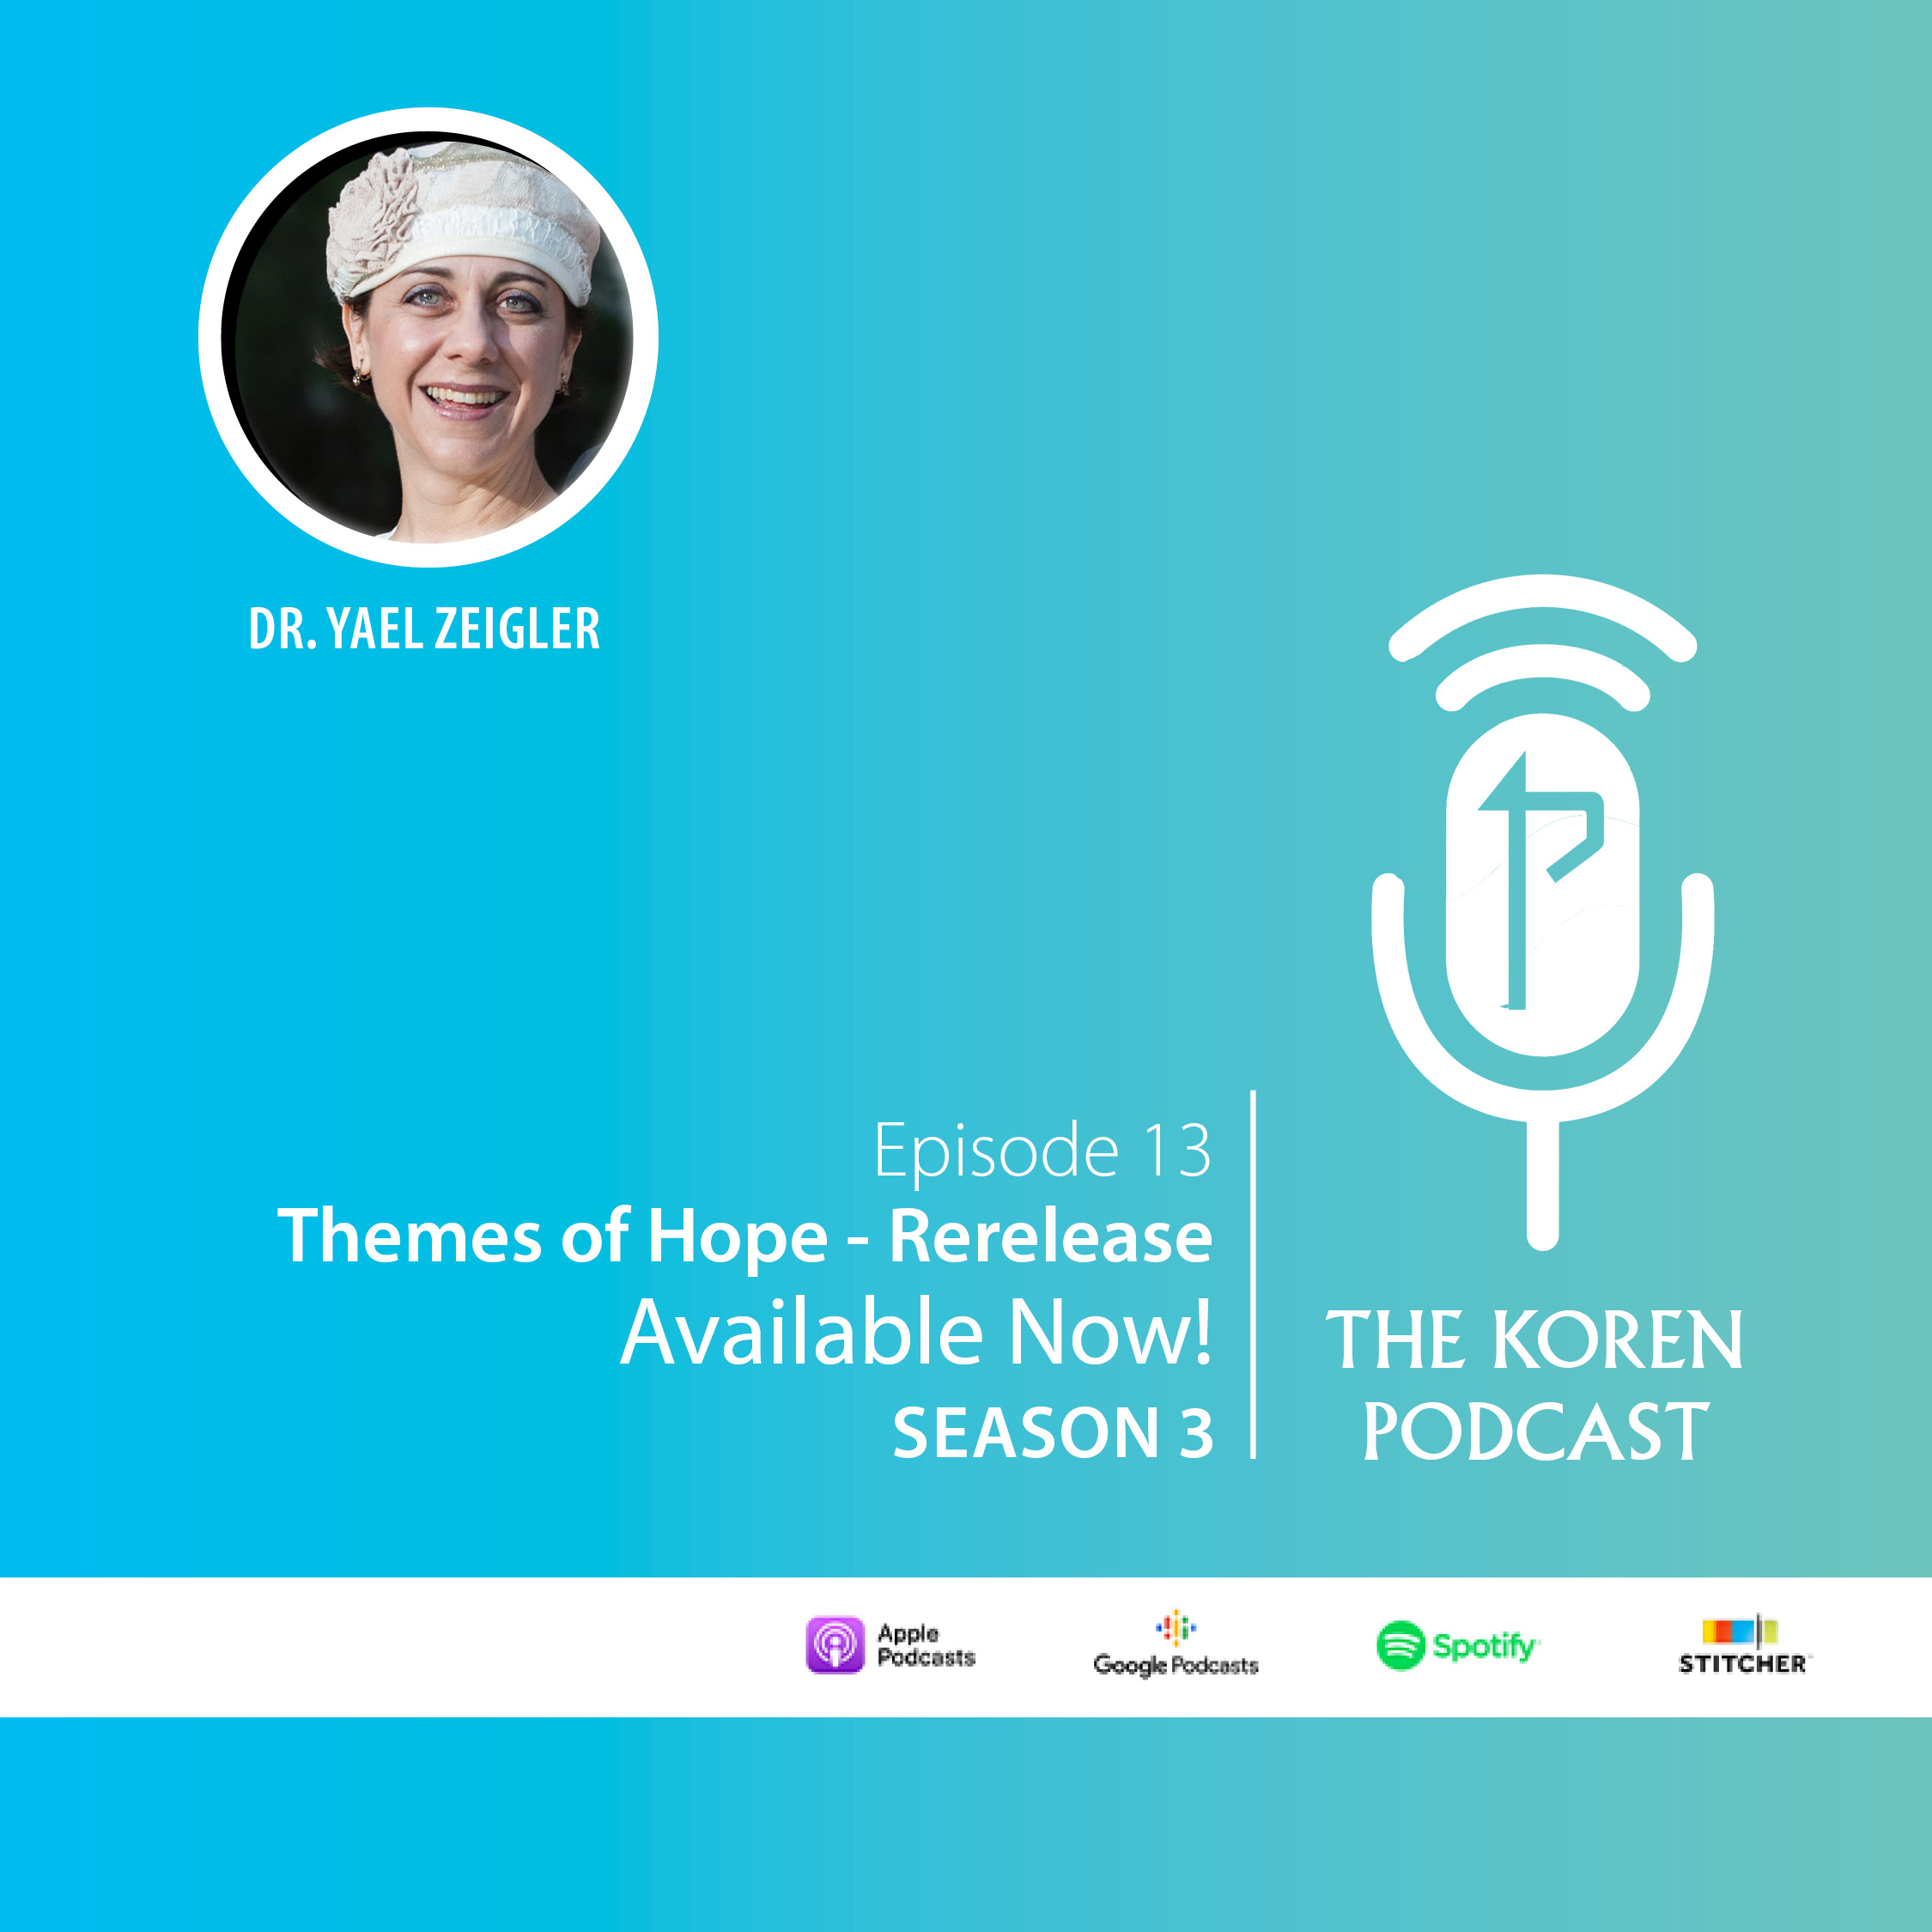 Themes of Hope with Dr. Yael Ziegler